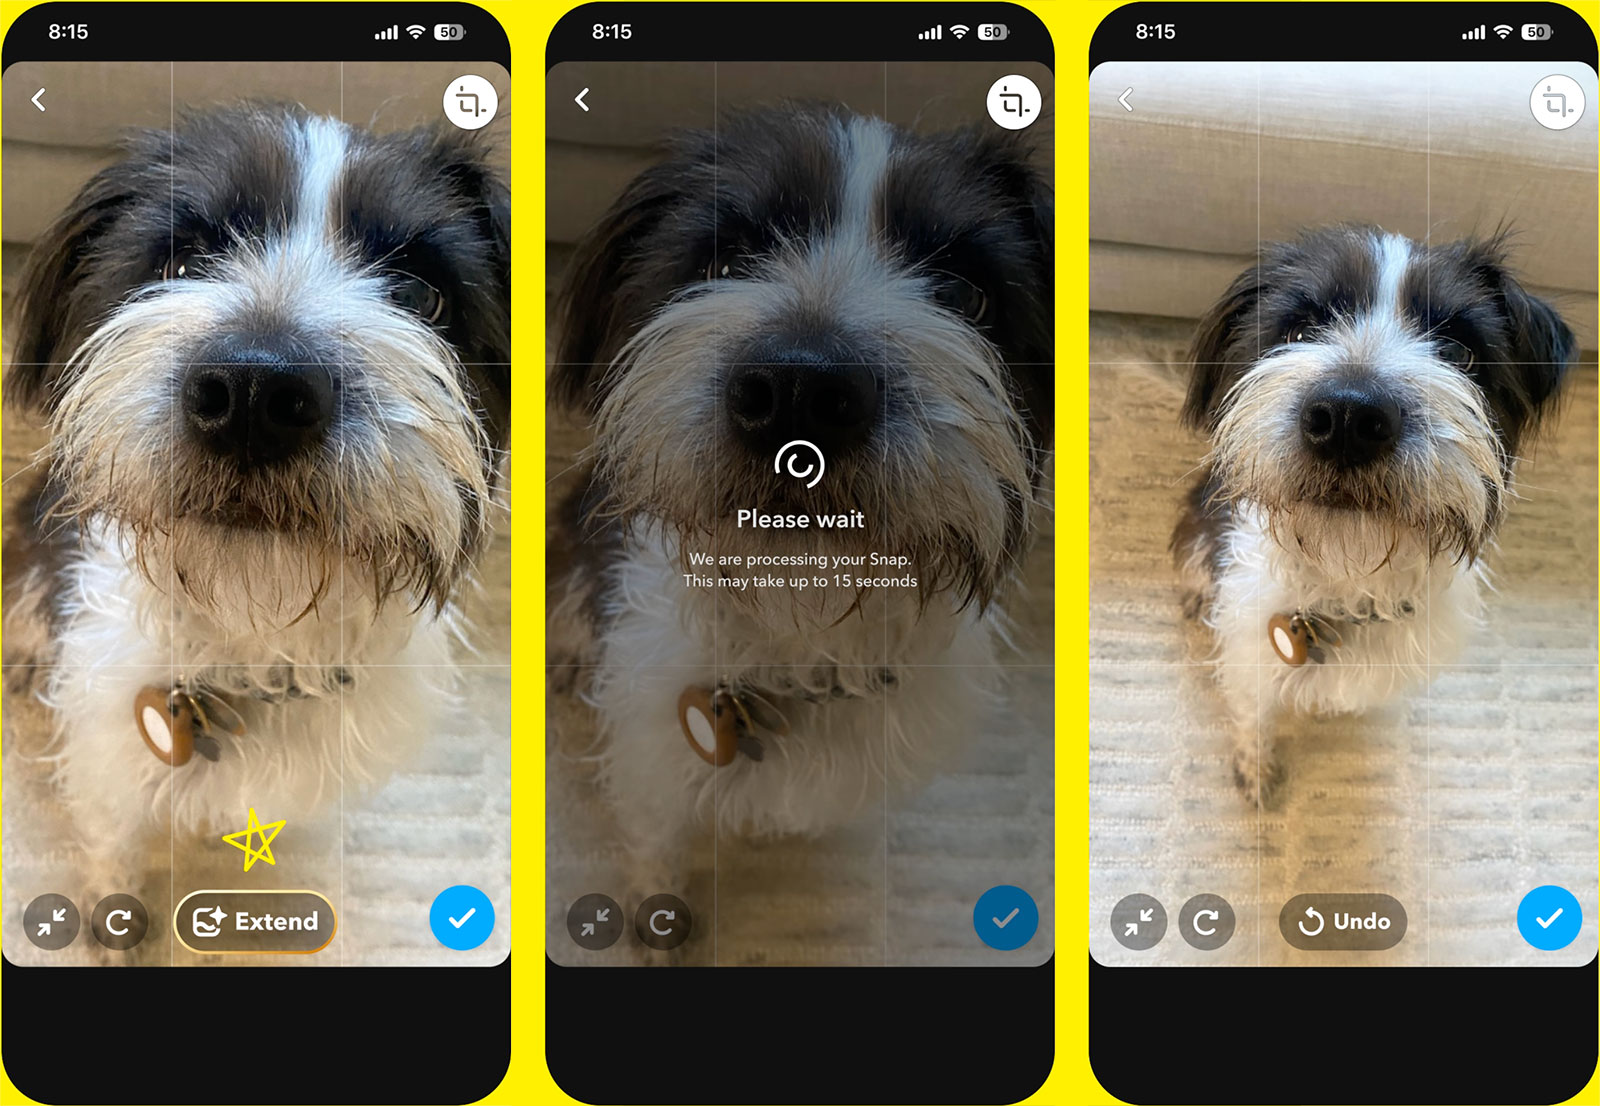 Snapchat+ subscribers can now use AI to create or expand images in the app